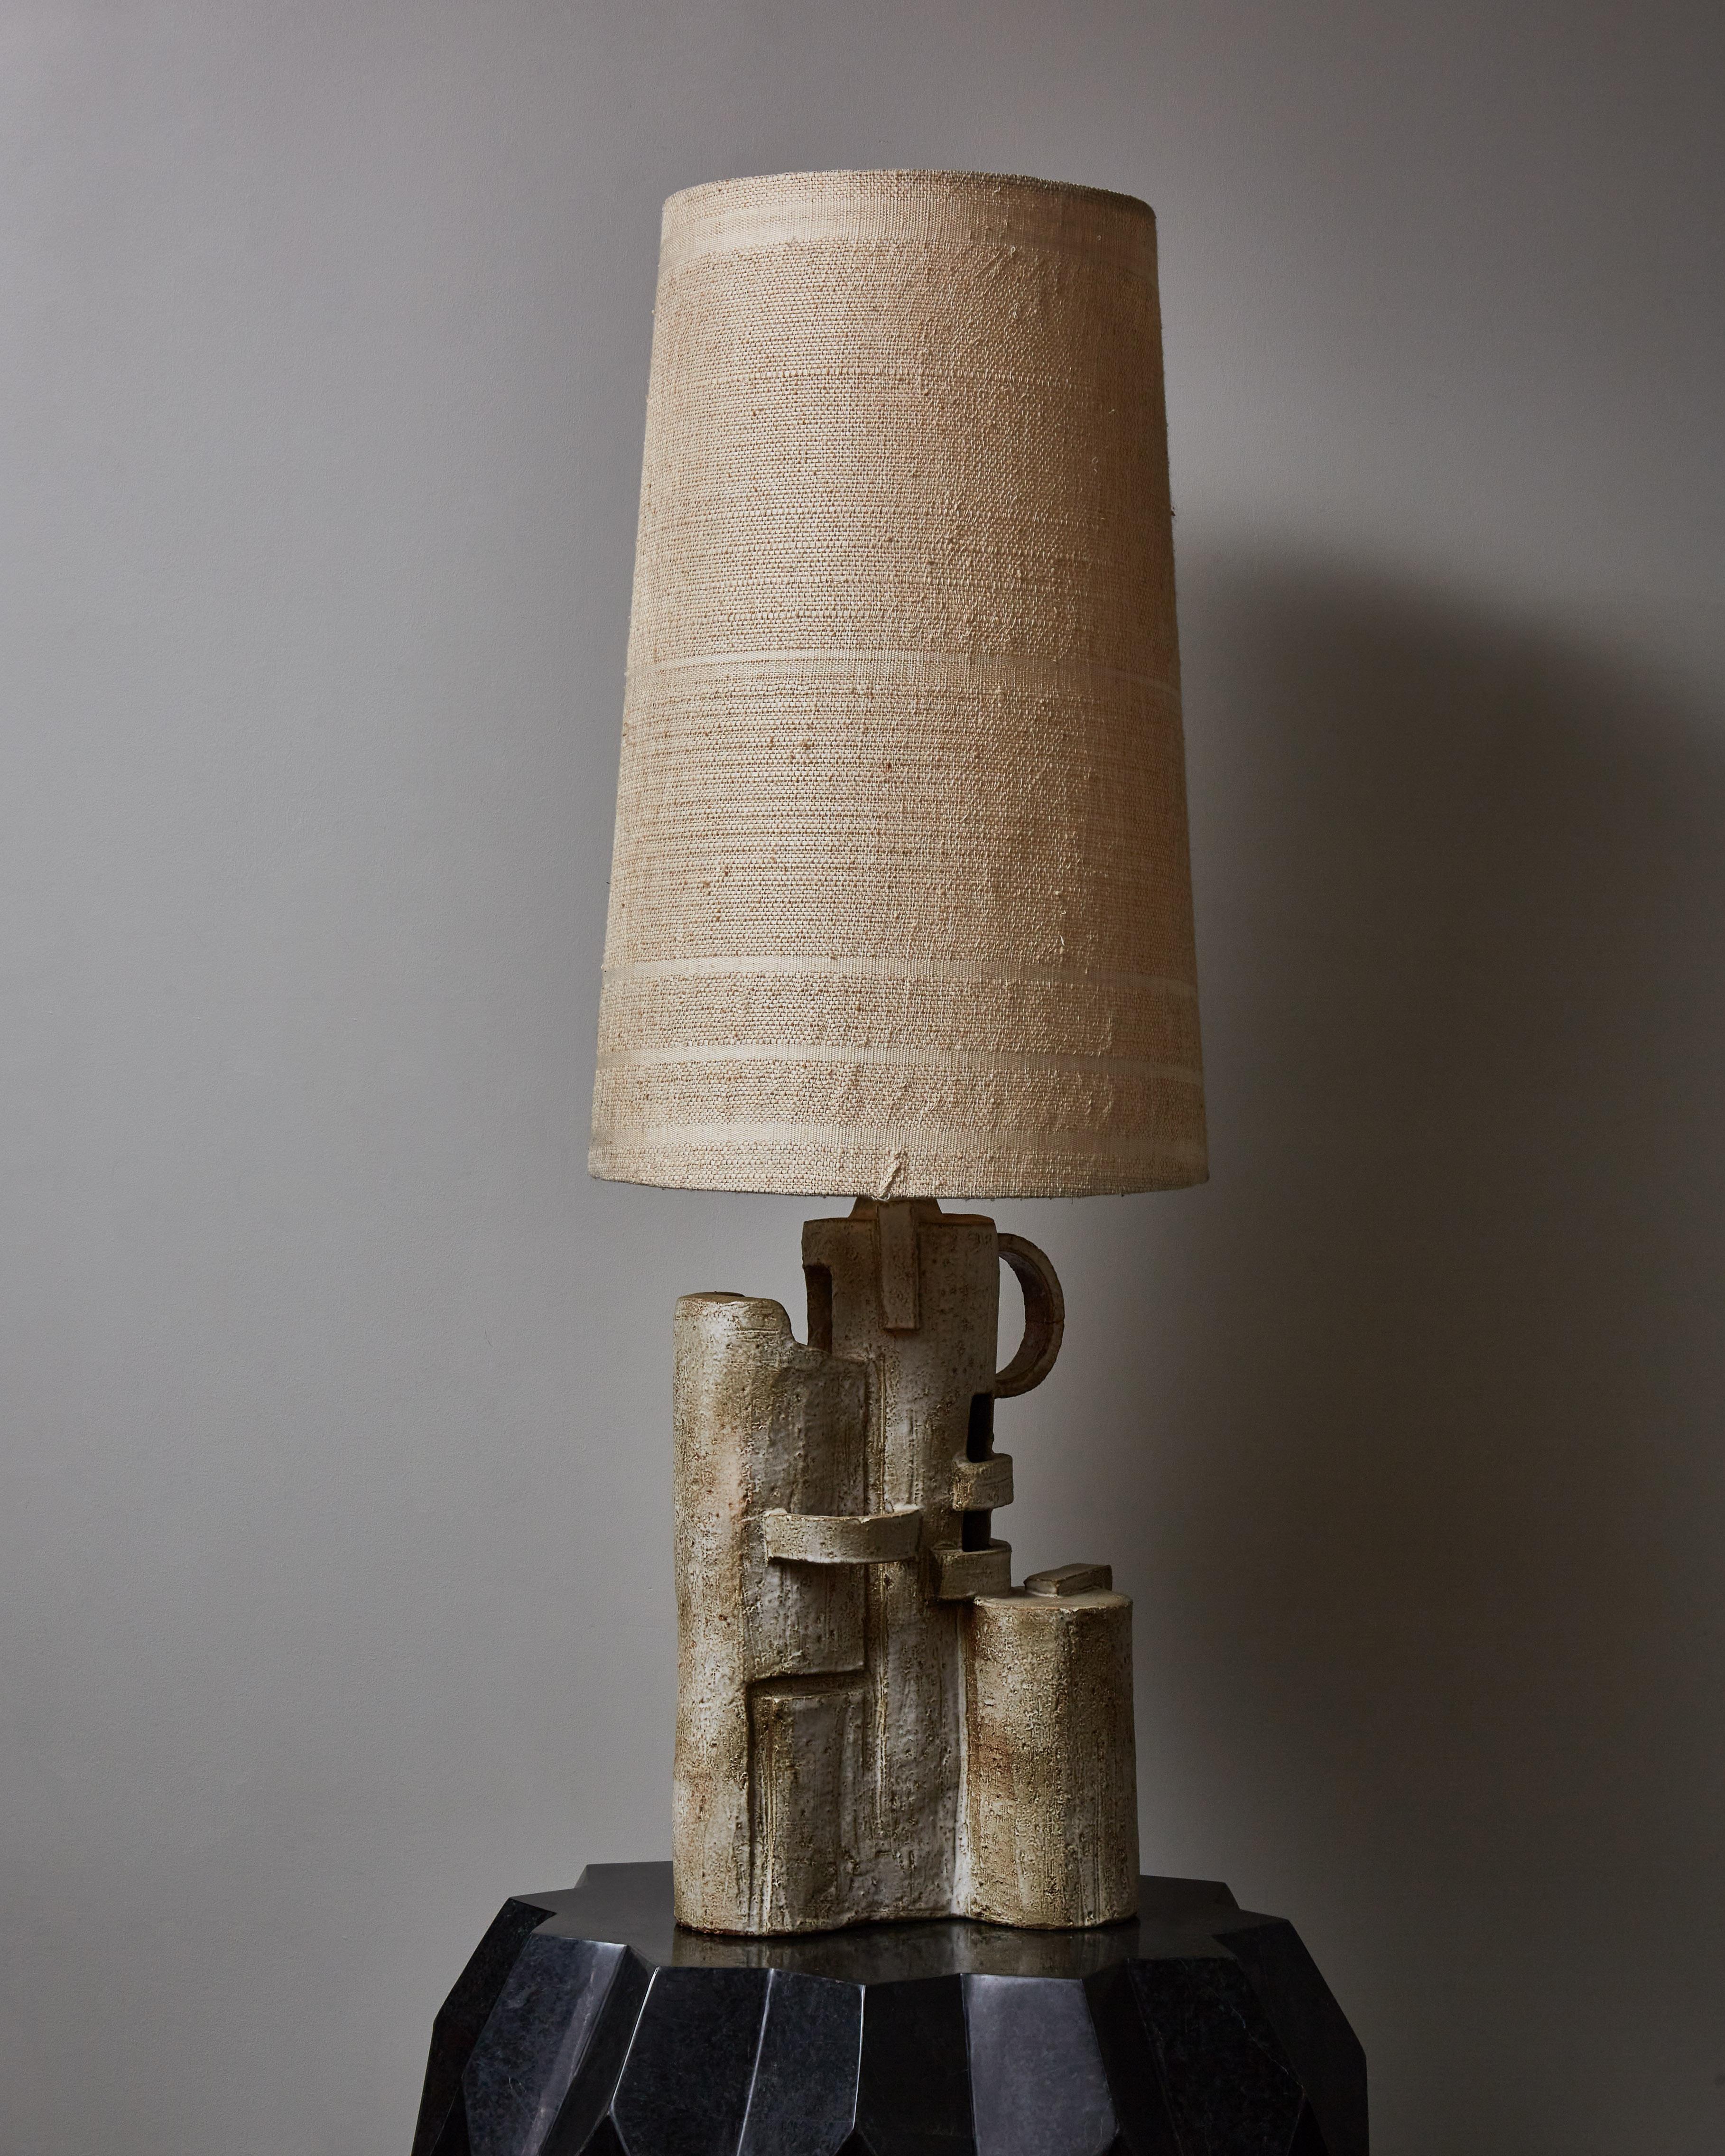 Impressive sculptural table lamp in glazed ceramic by Marius Bessone, circa 1970s. Signed both behind and inside the lamp by the artist.